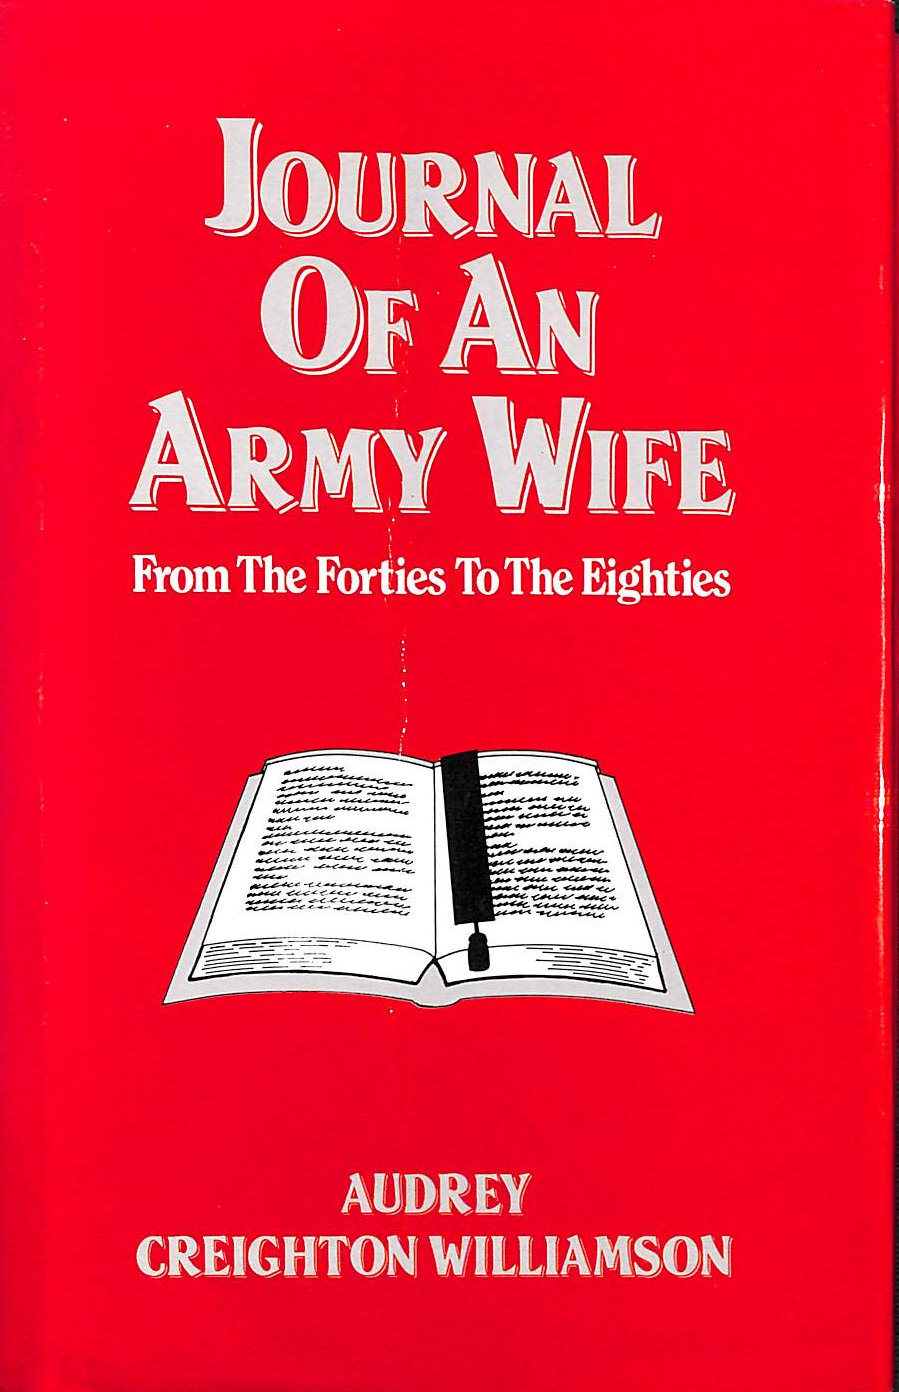 WILLIAMSON, AUDREY CREIGHTON - Journal of an Army Wife: From the Forties to the Eighties